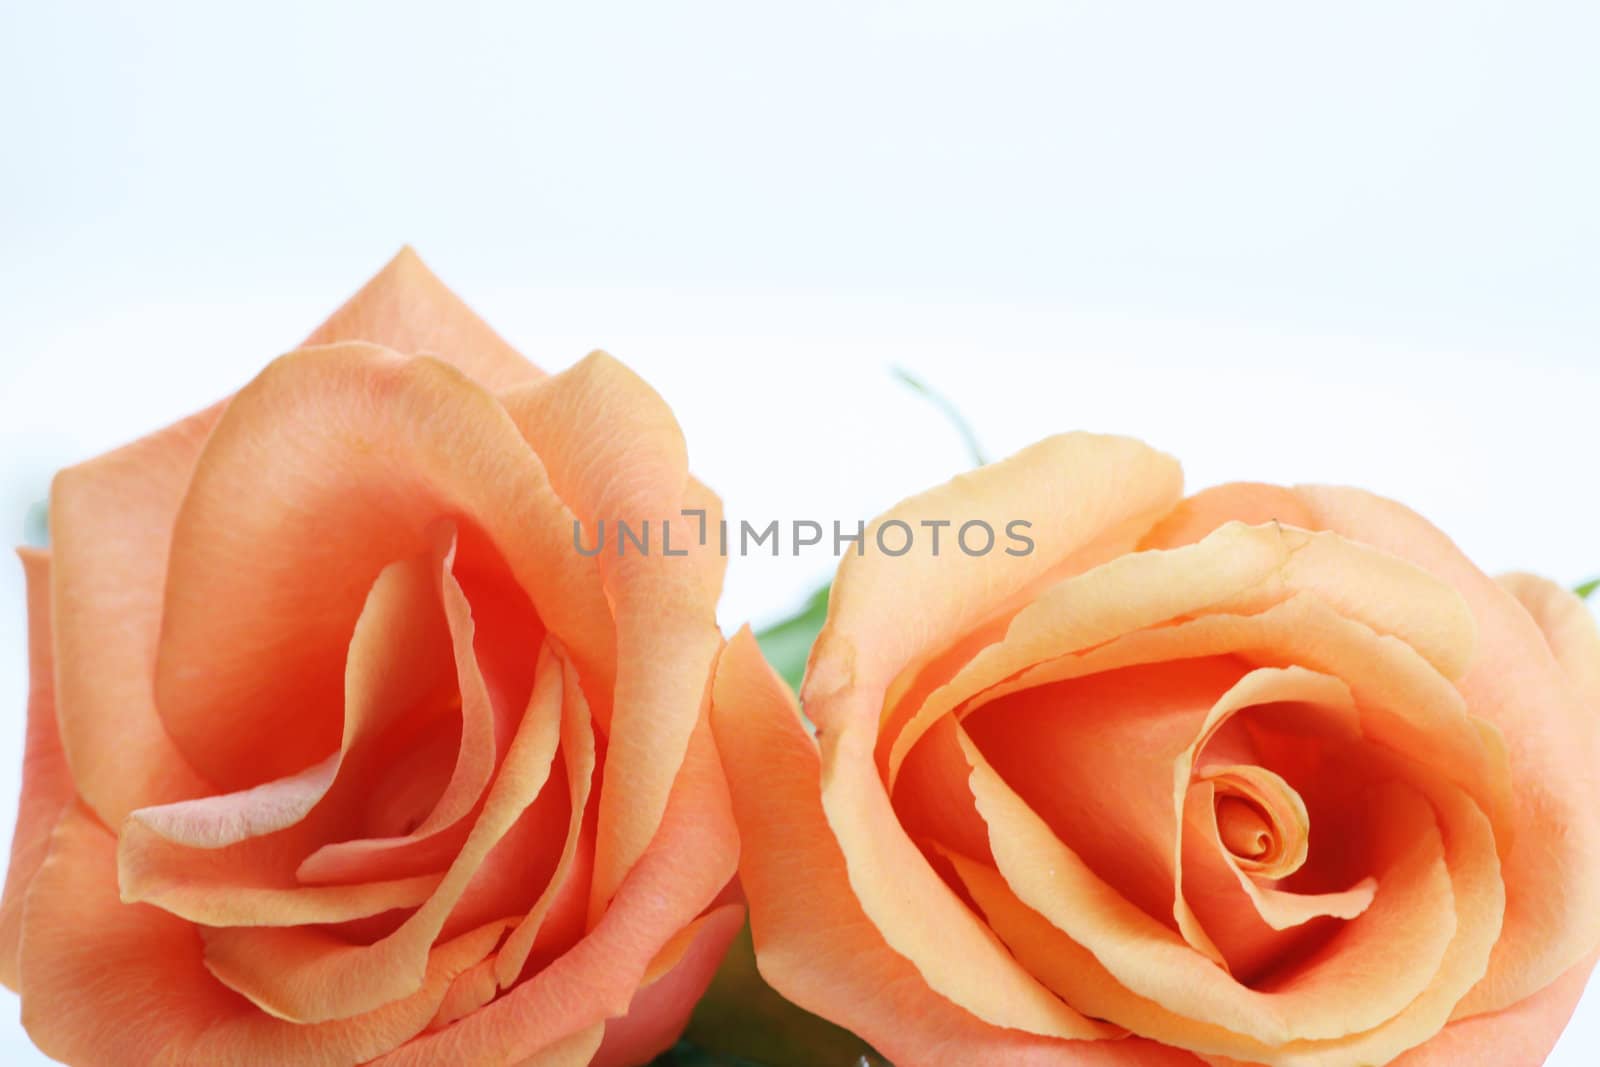 Peach colored, coral colored roses by jarenwicklund